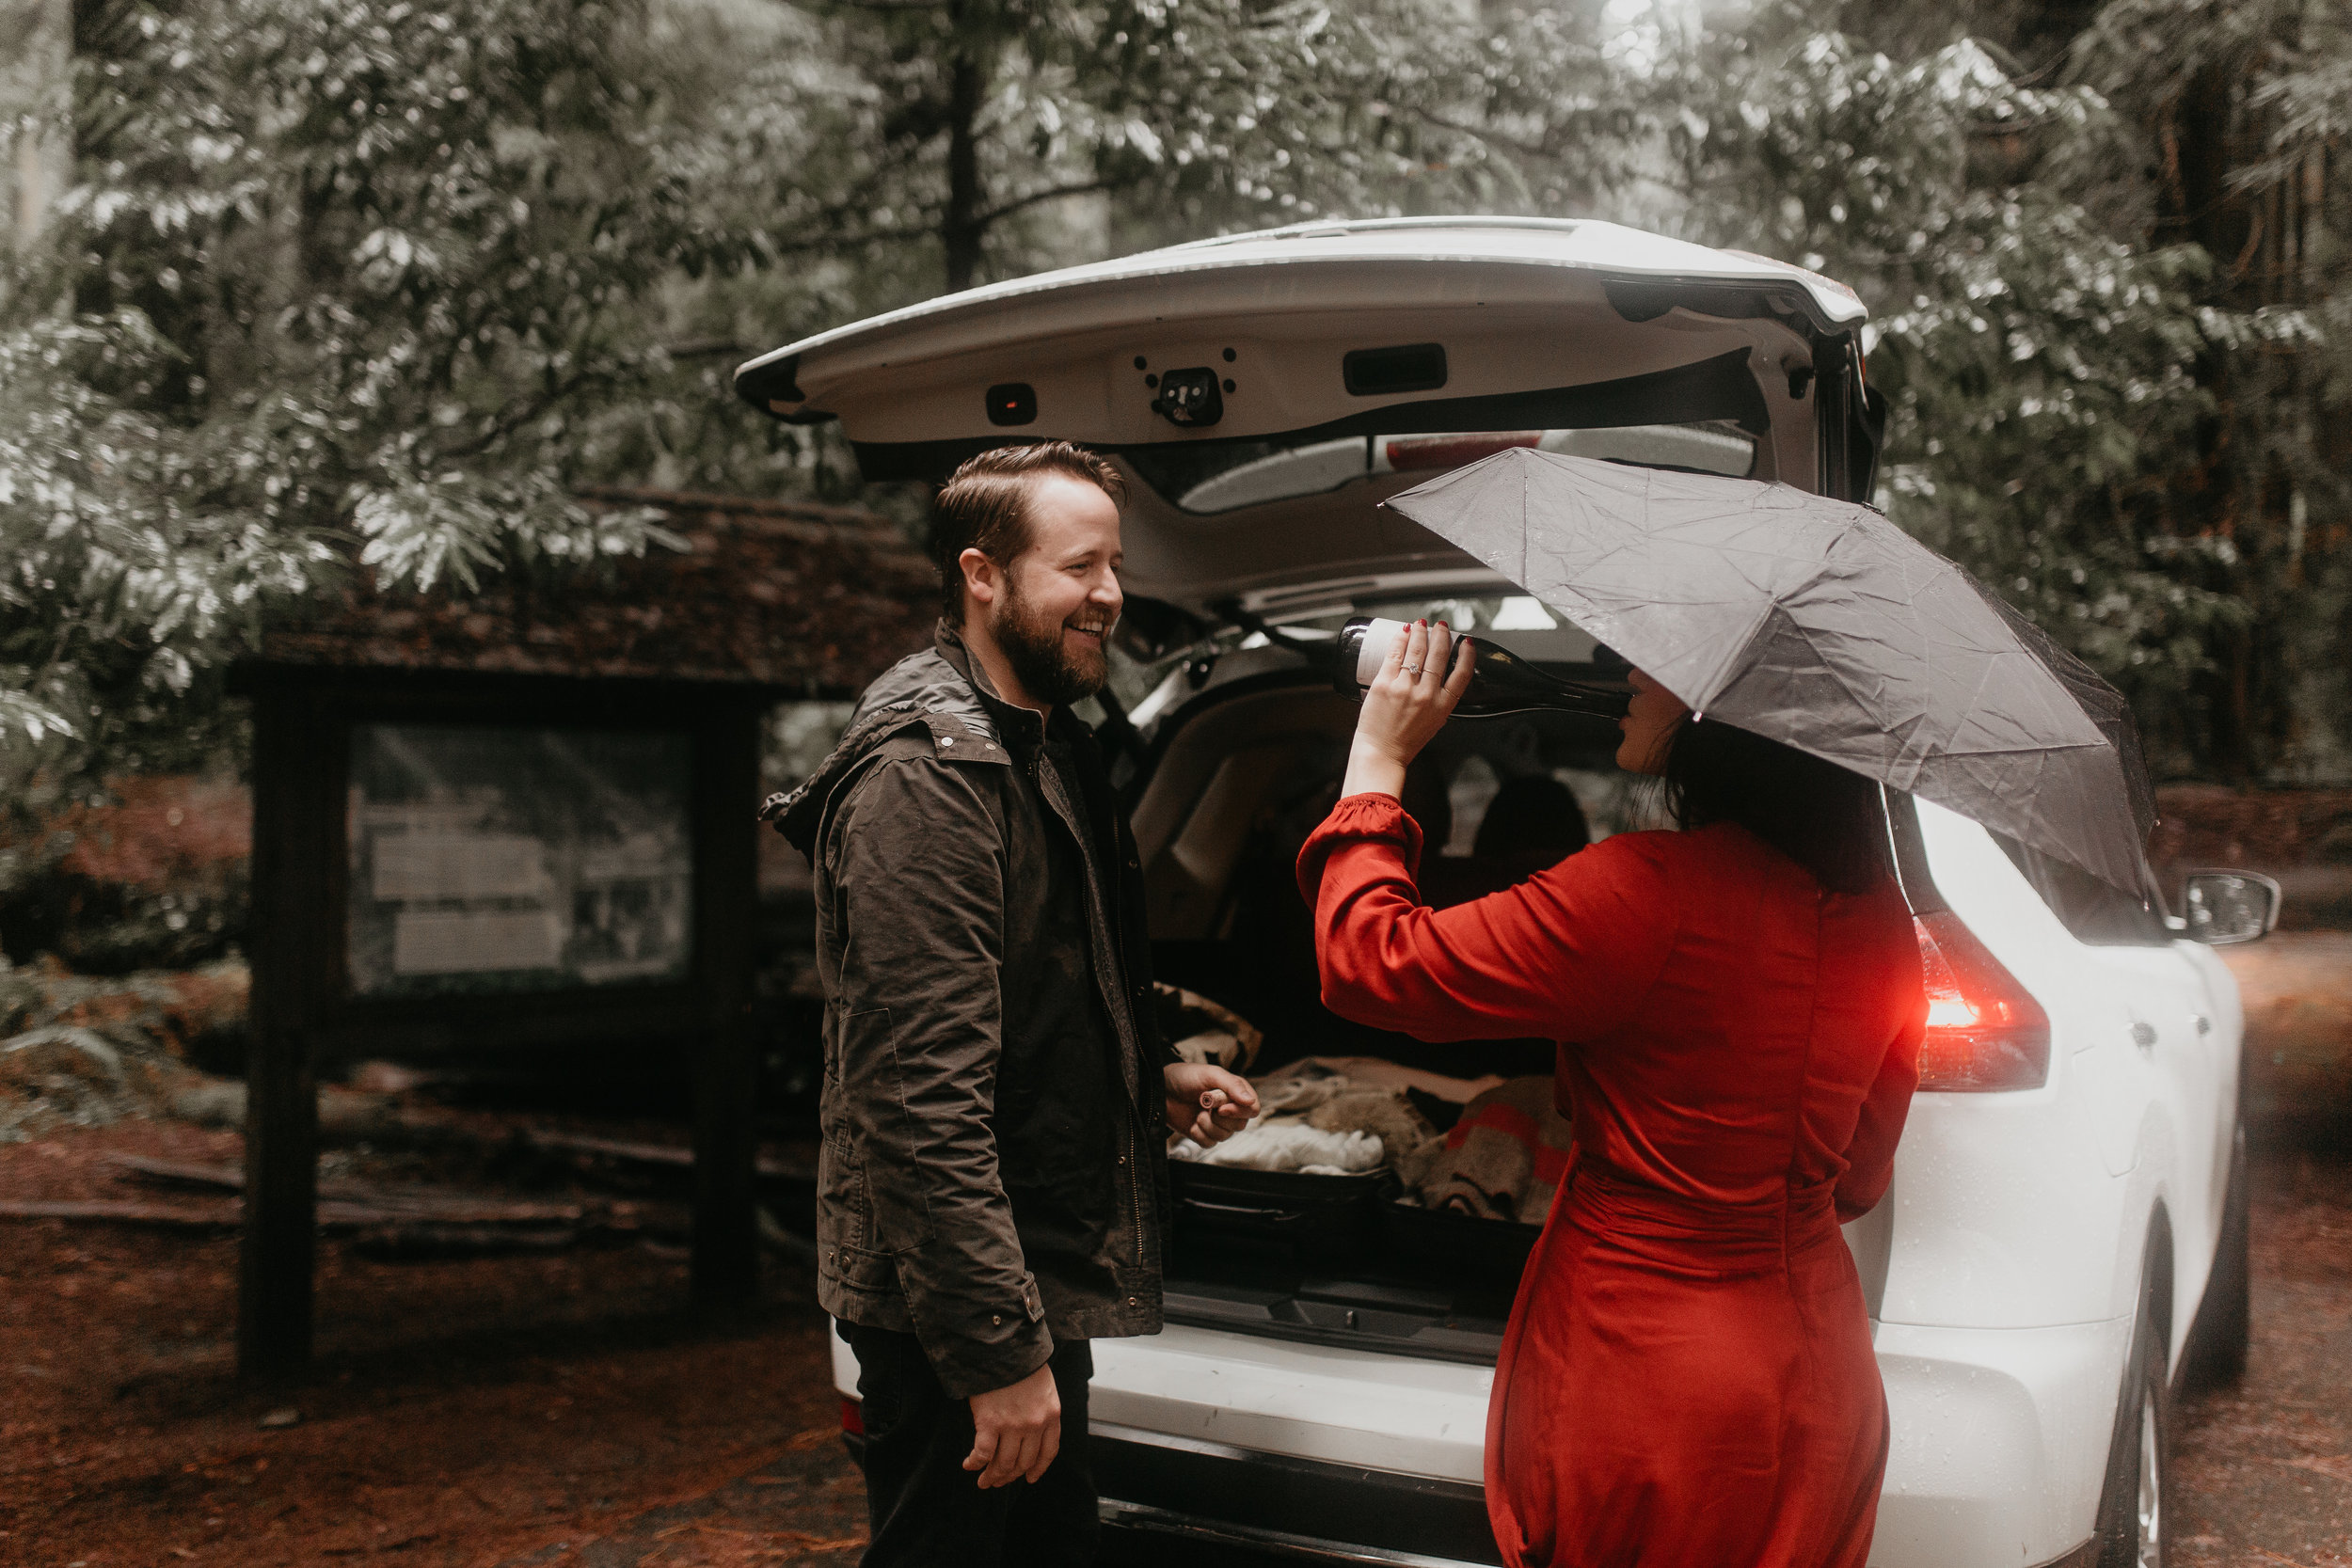 nicole-daacke-photography-redwoods-national-park-forest-rainy-foggy-adventure-engagement-session-humboldt-county-old-growth-redwood-tree-elopement-intimate-wedding-photographer-31.jpg